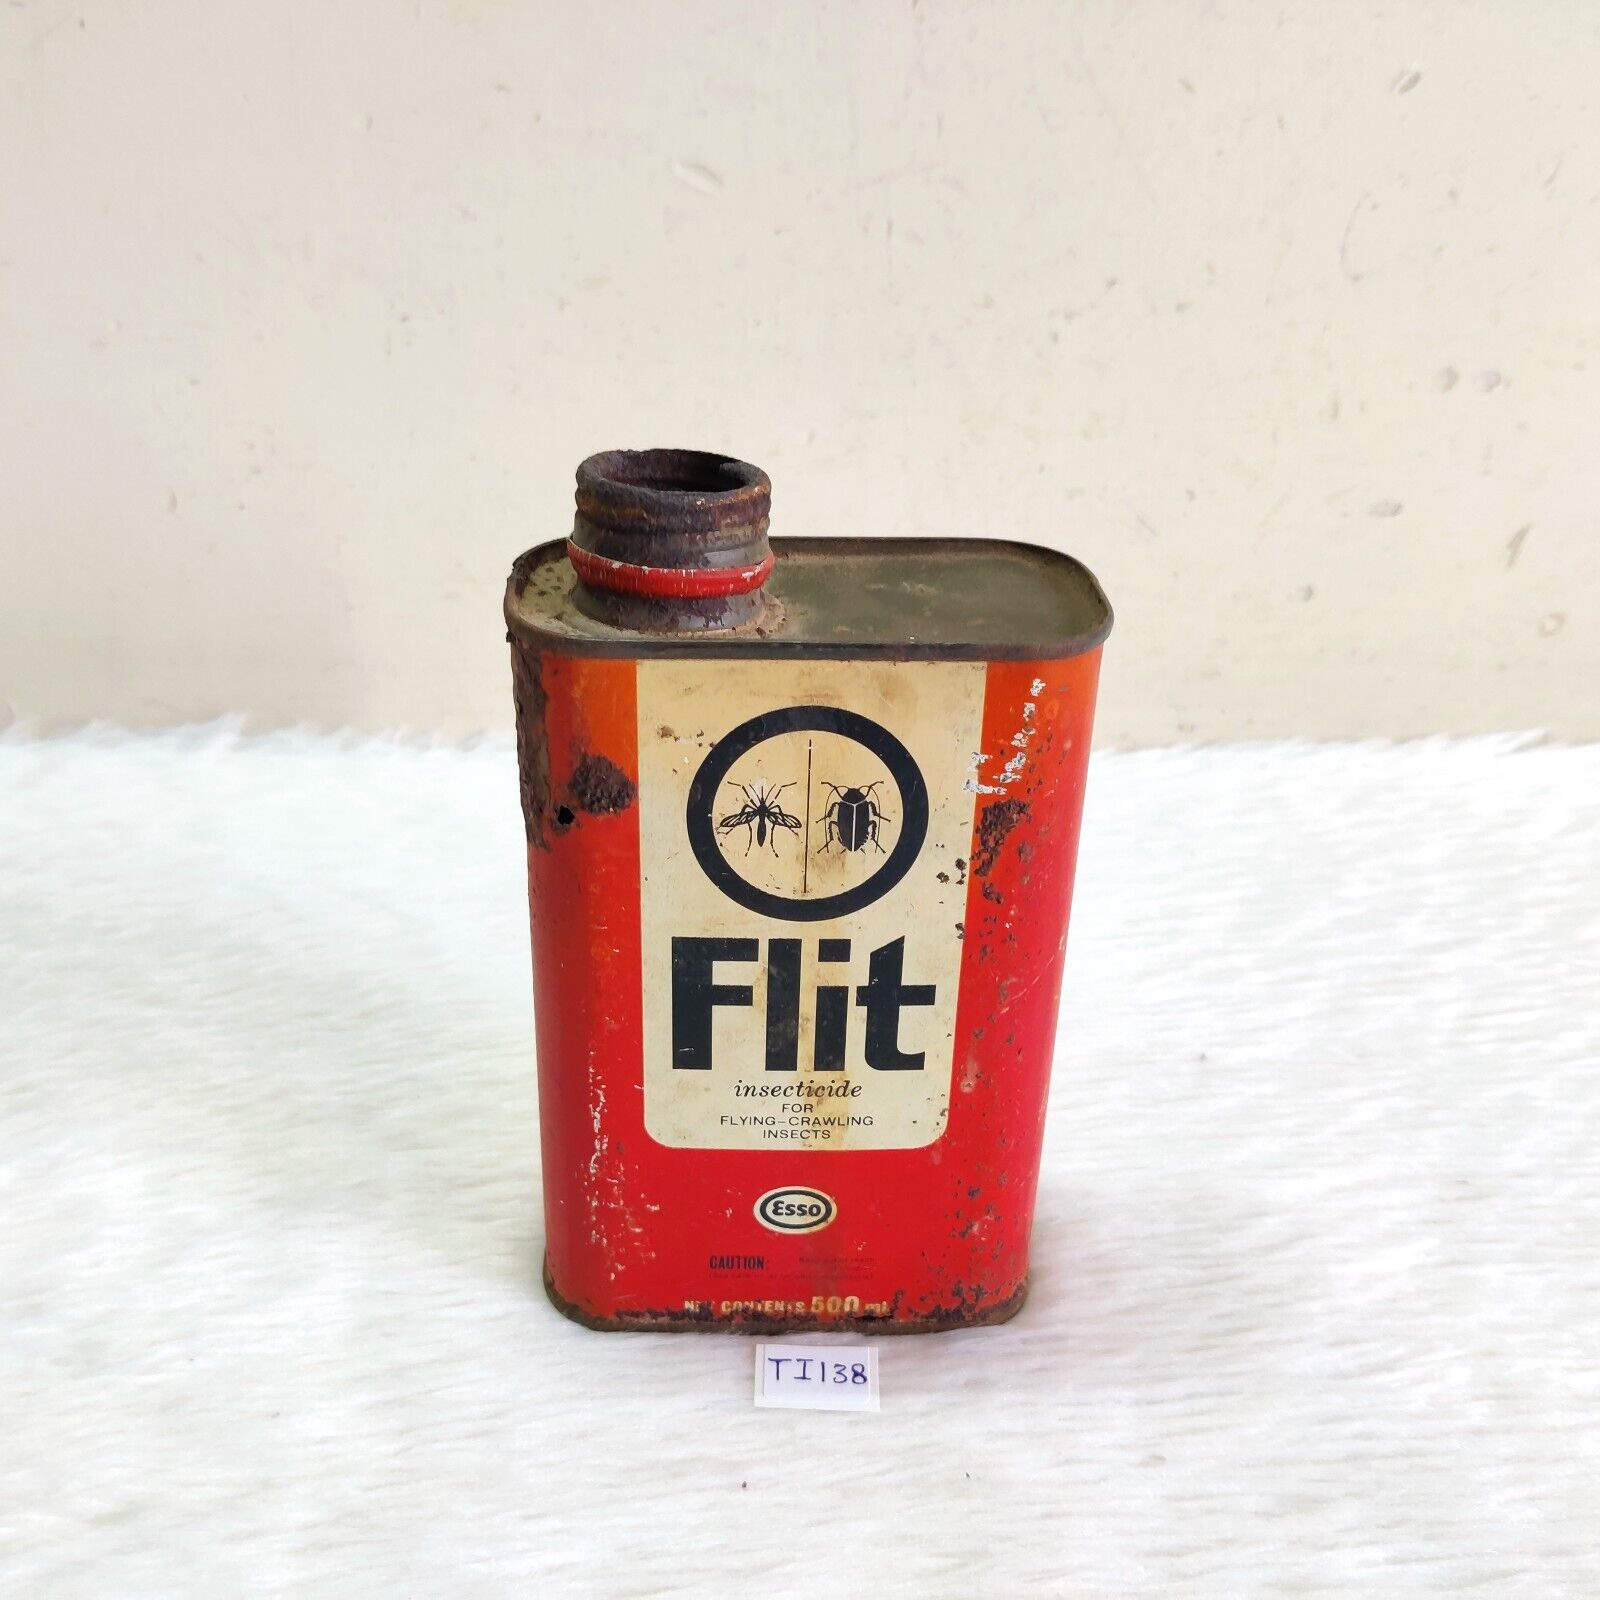 Vintage Esso Flit Flying Crawling Insects Advertising Tin Can Old TI138